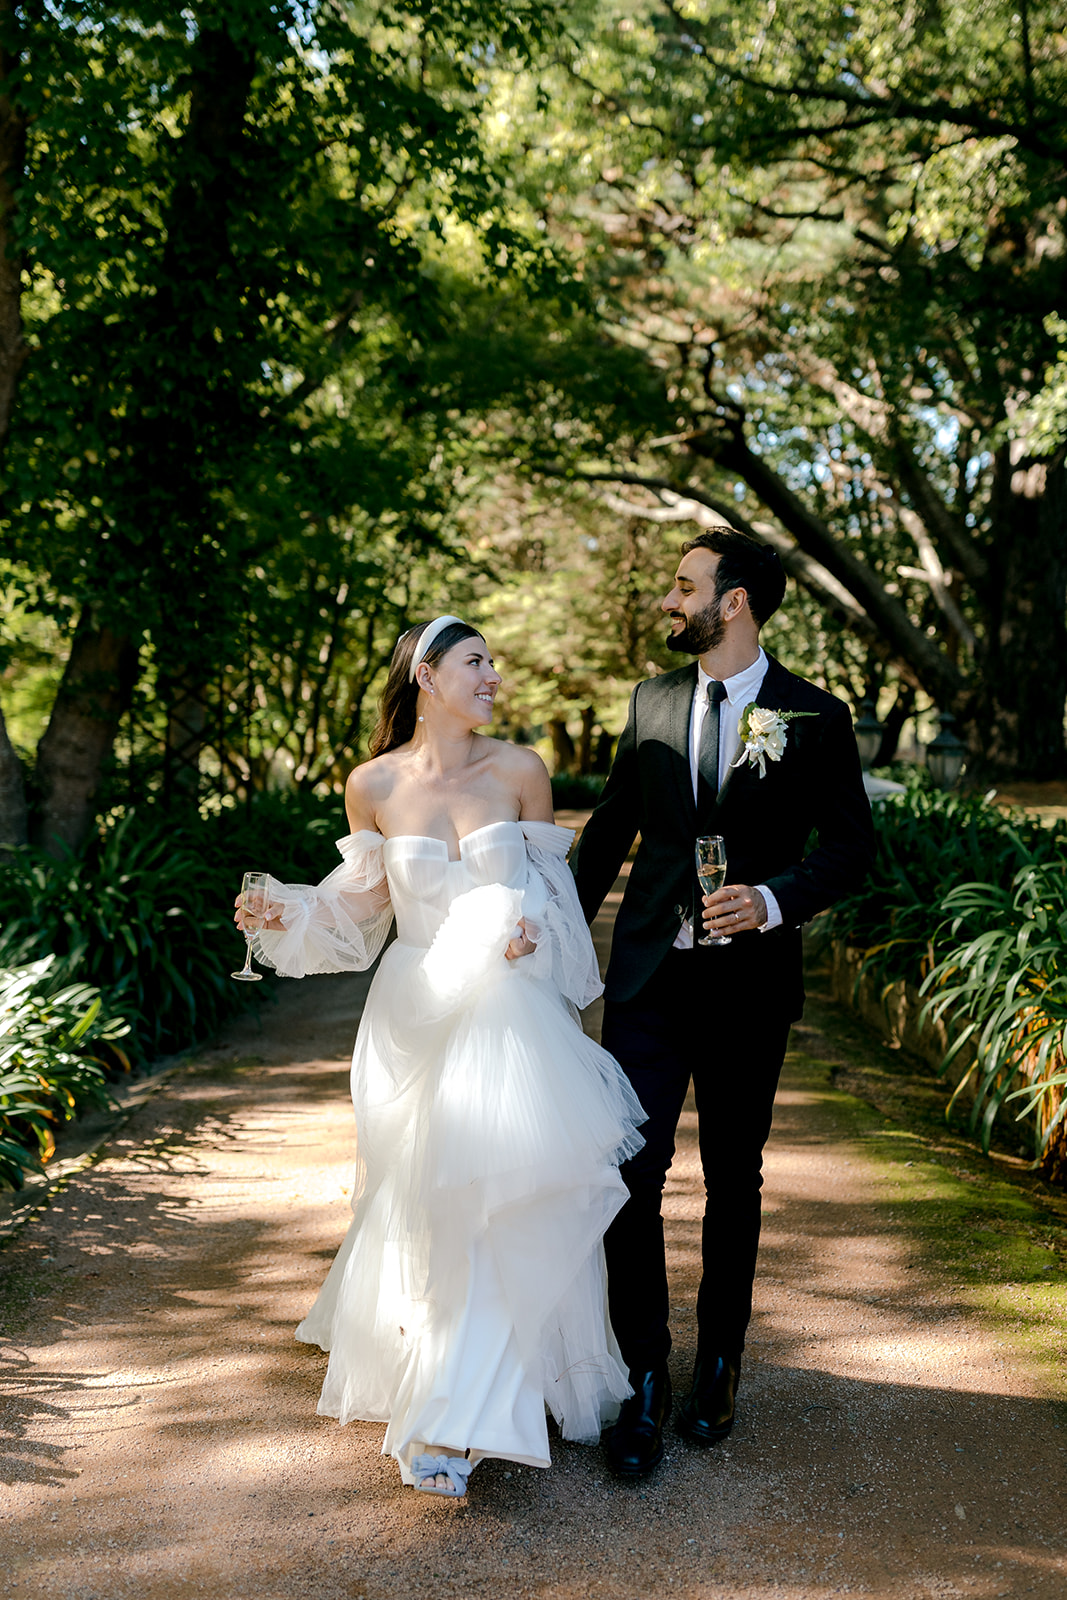 Portrait of bride & groom walking hand-in-hand in an English-inspired garden during their elegant country wedding.